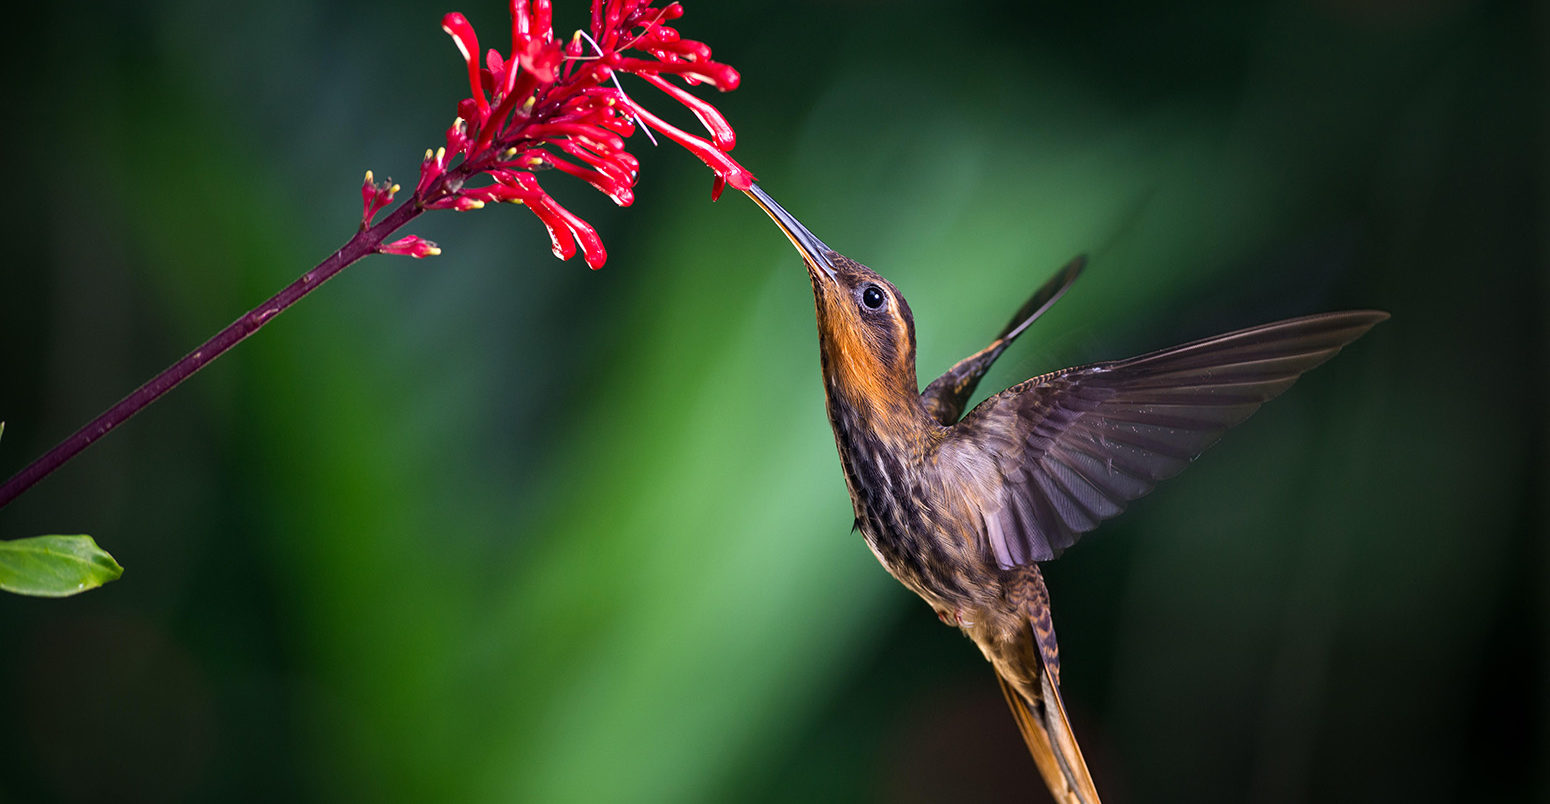 Saw-billed Hermit from the Atlantic Rainforest of SE Brazil. Credit: Octavio Campos Salles / Alamy Stock Photo FFKGJY